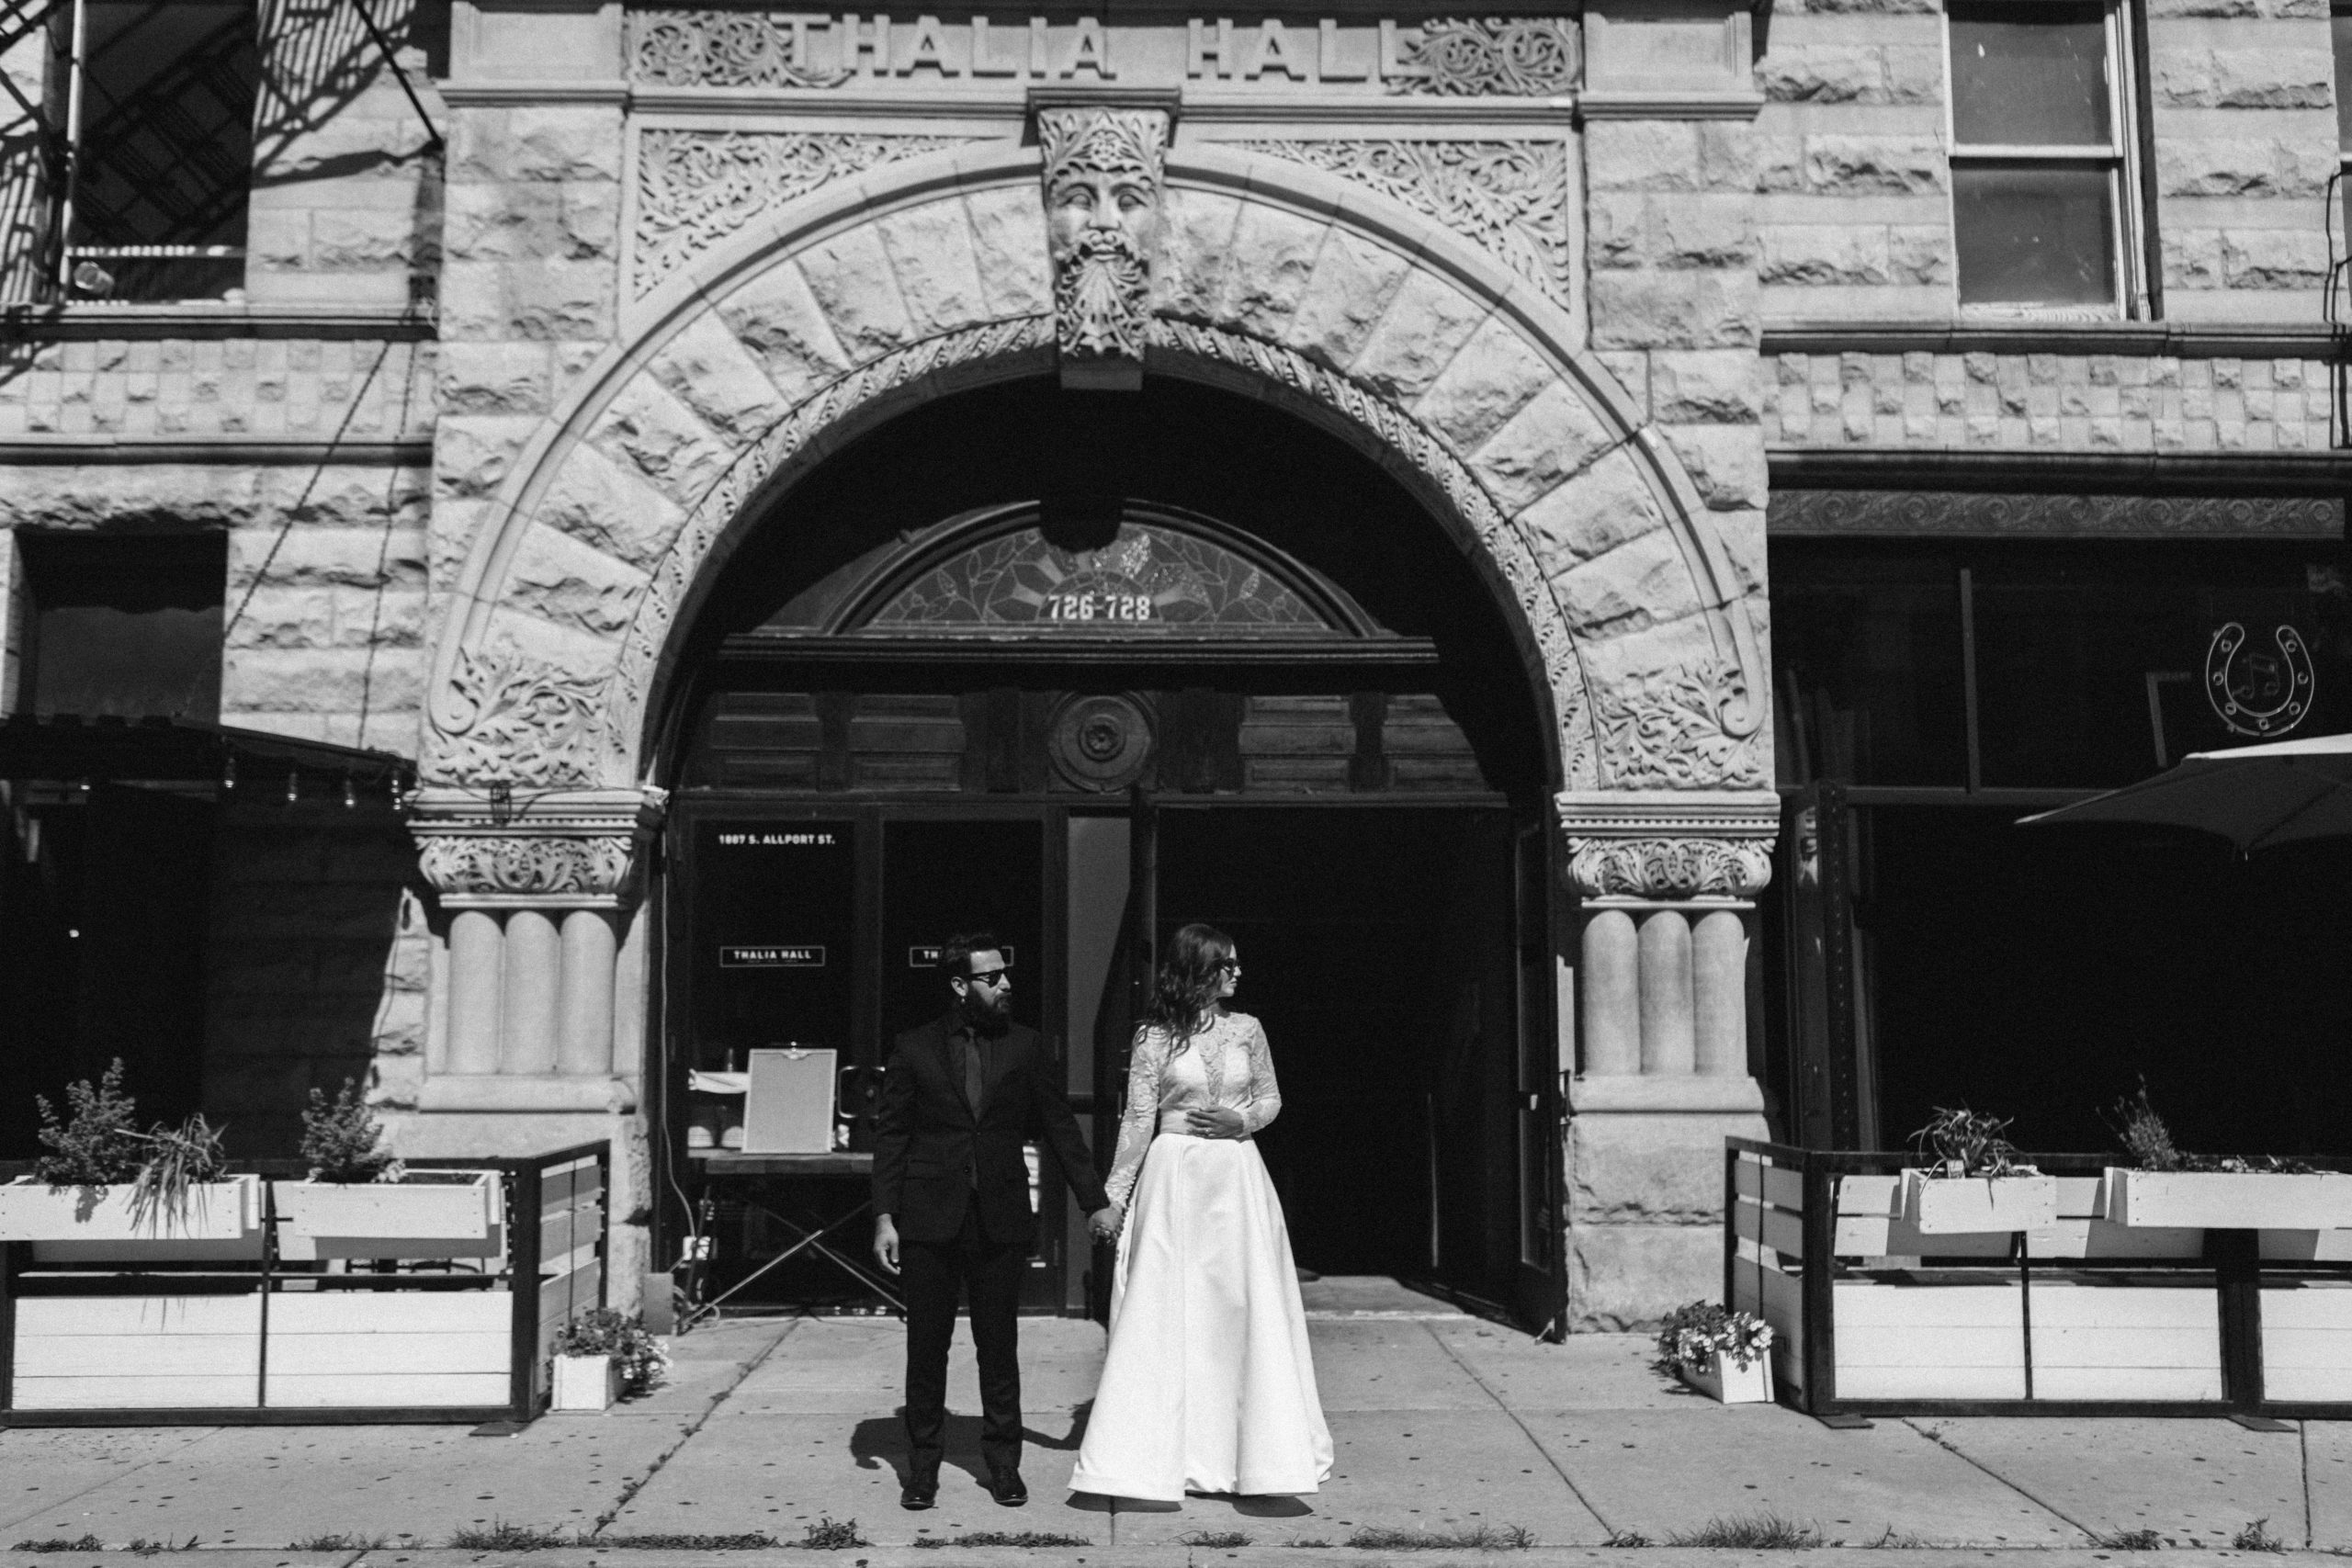 Bride and groom in their wedding attire looking across the street outside Thalia Hall in Chicago.